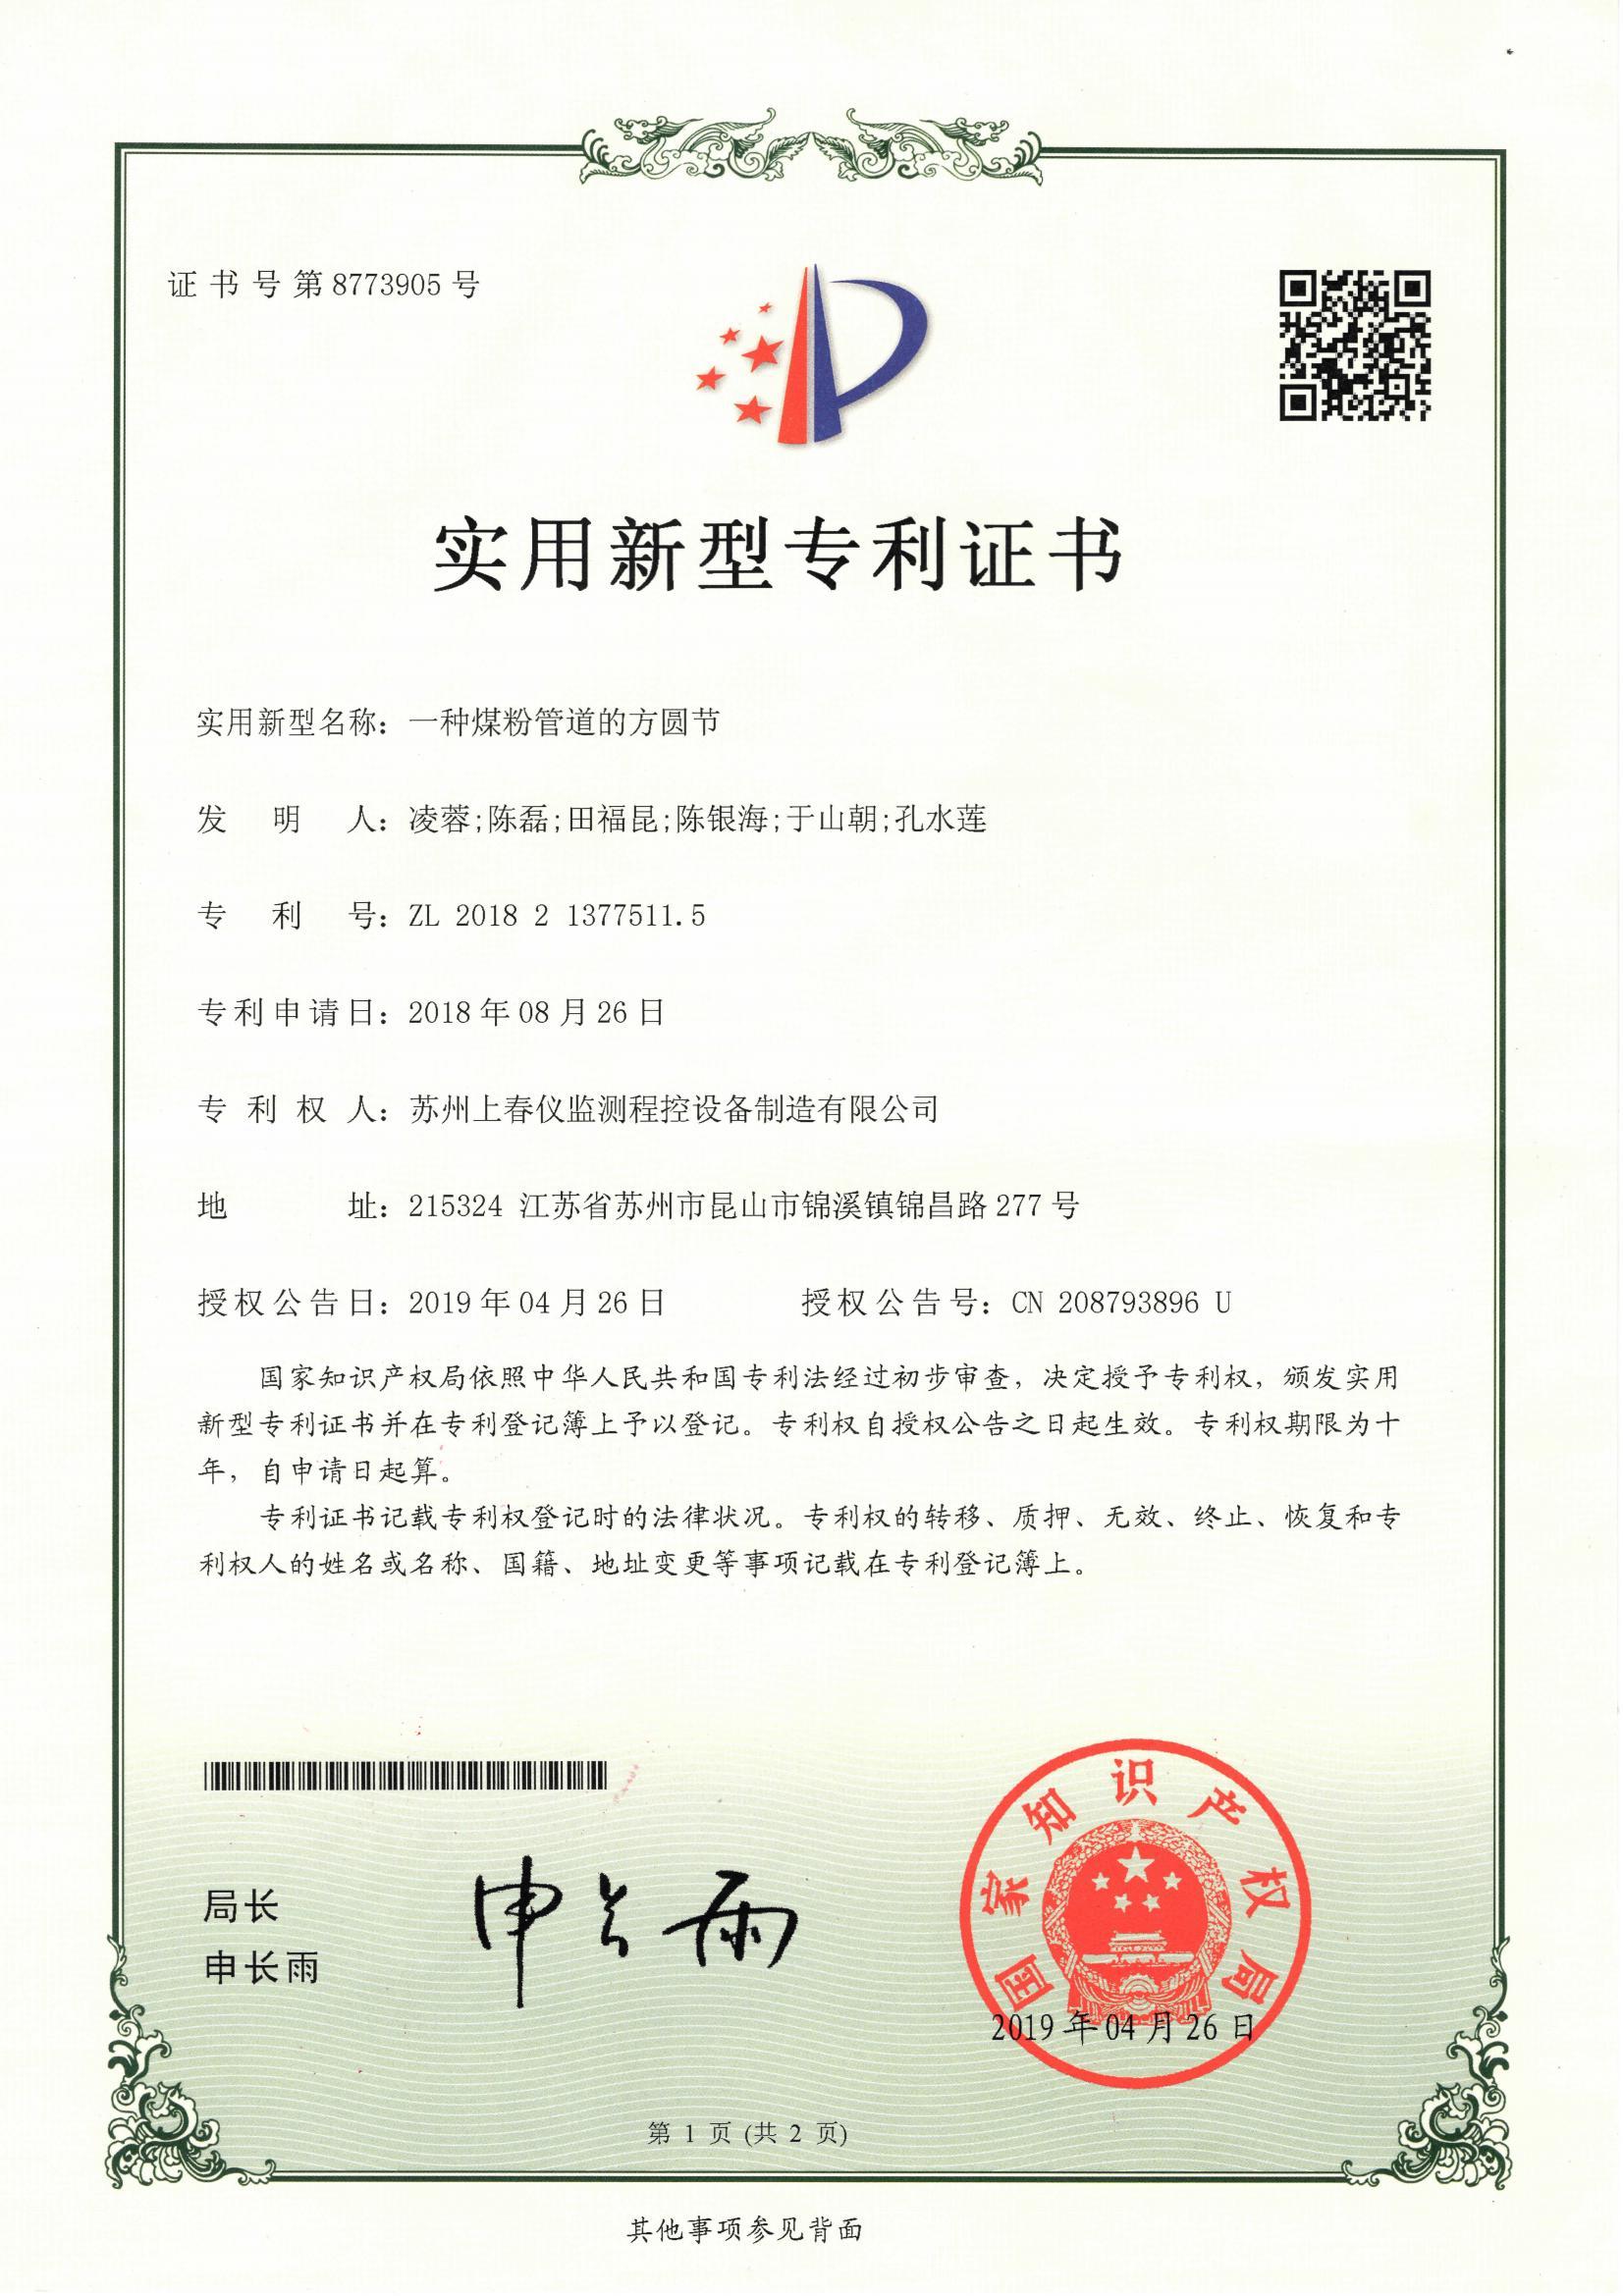 Patent Certificate Of Square Section Of Pulverized Coal Pipeline